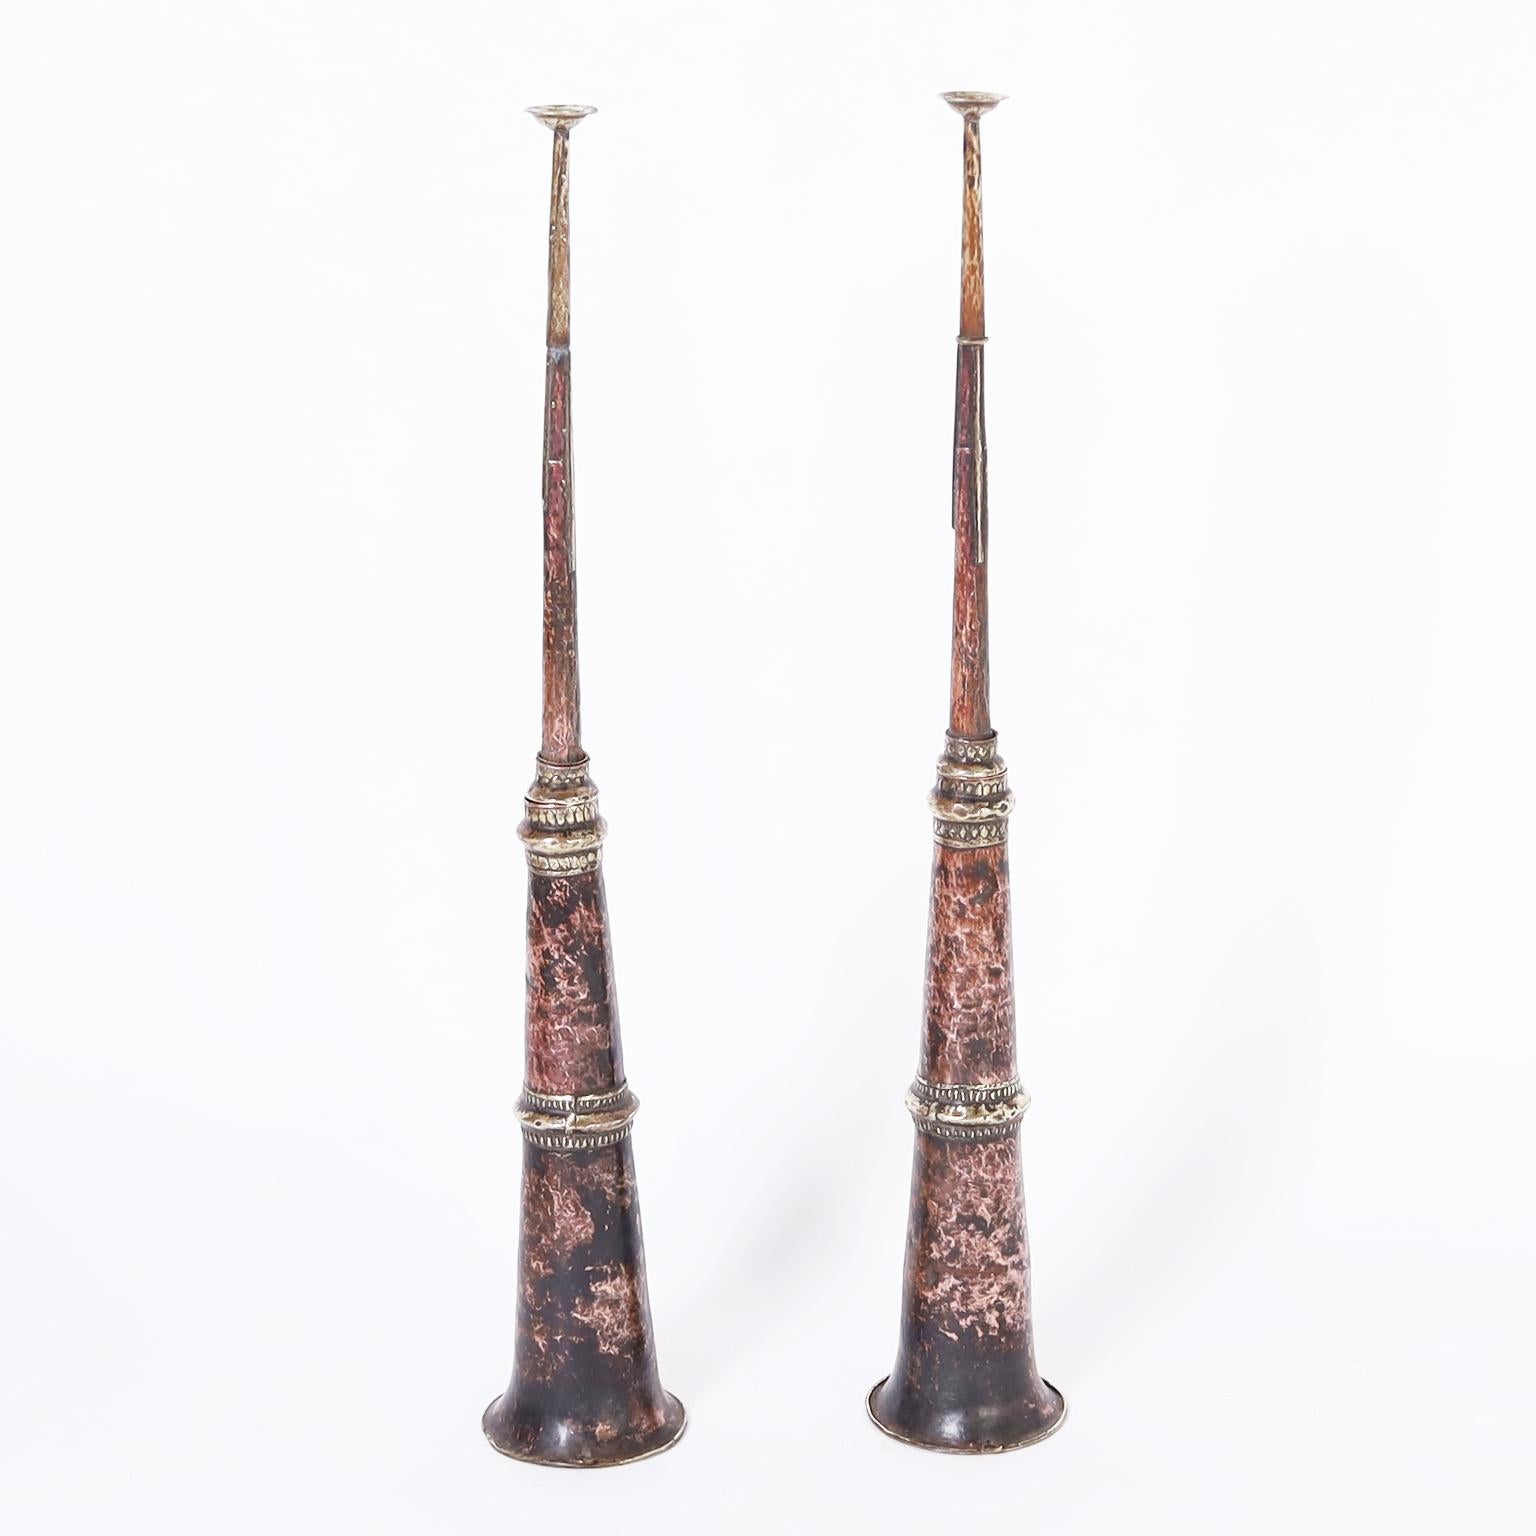 Intriguing pair of 19th century Tibetan horns hand crafted with copper and brass in a charming rustic technique featuring a time turned lush patina.

Measure: 50.5